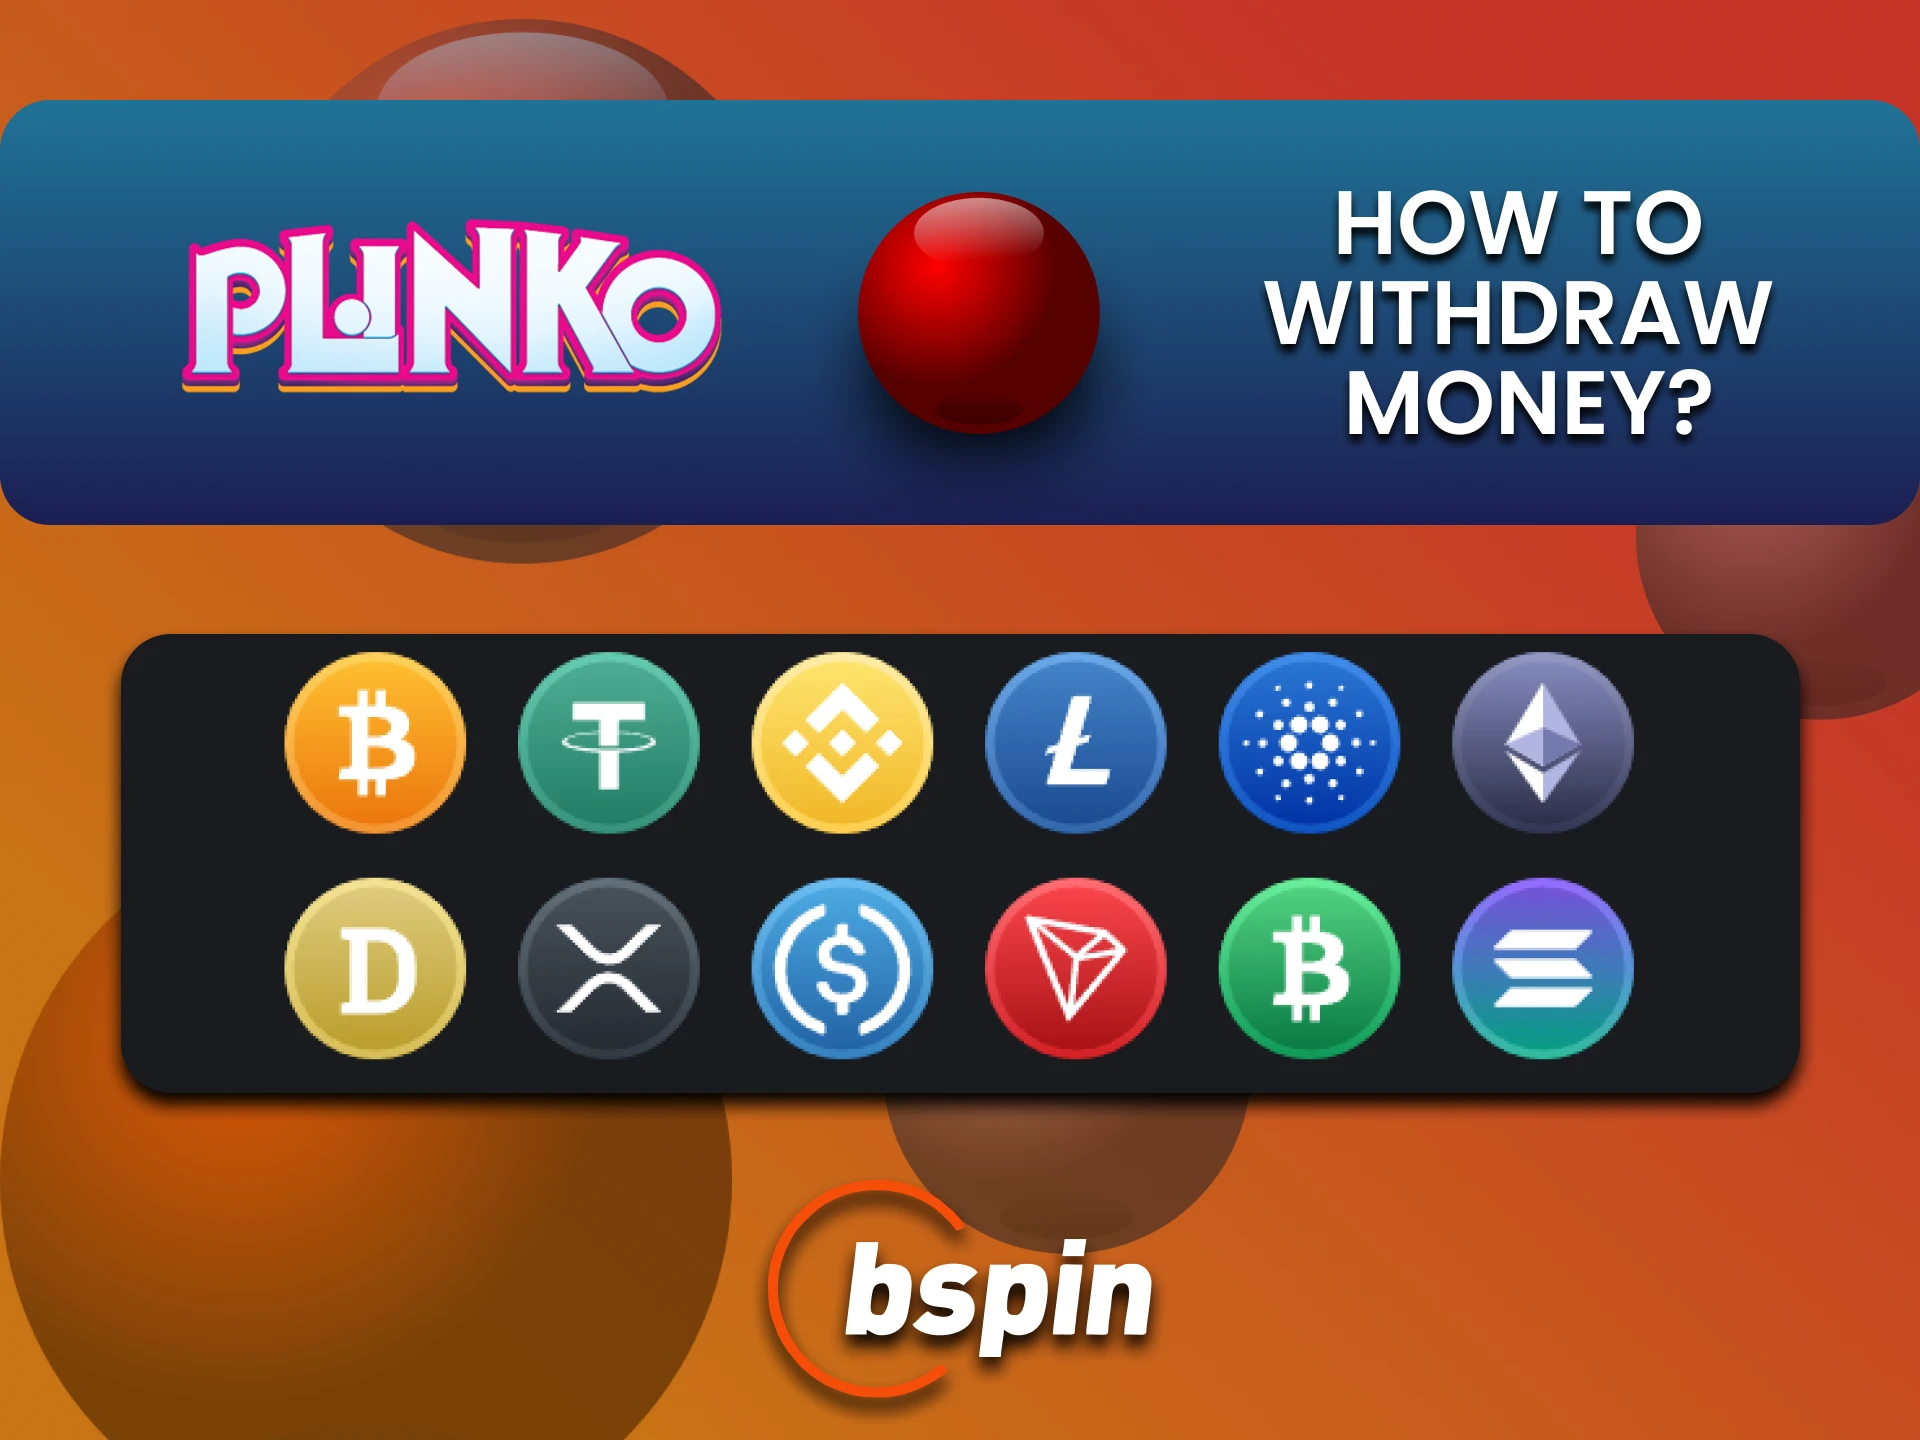 Choose your withdrawal method for Bspin for playing Plinko.